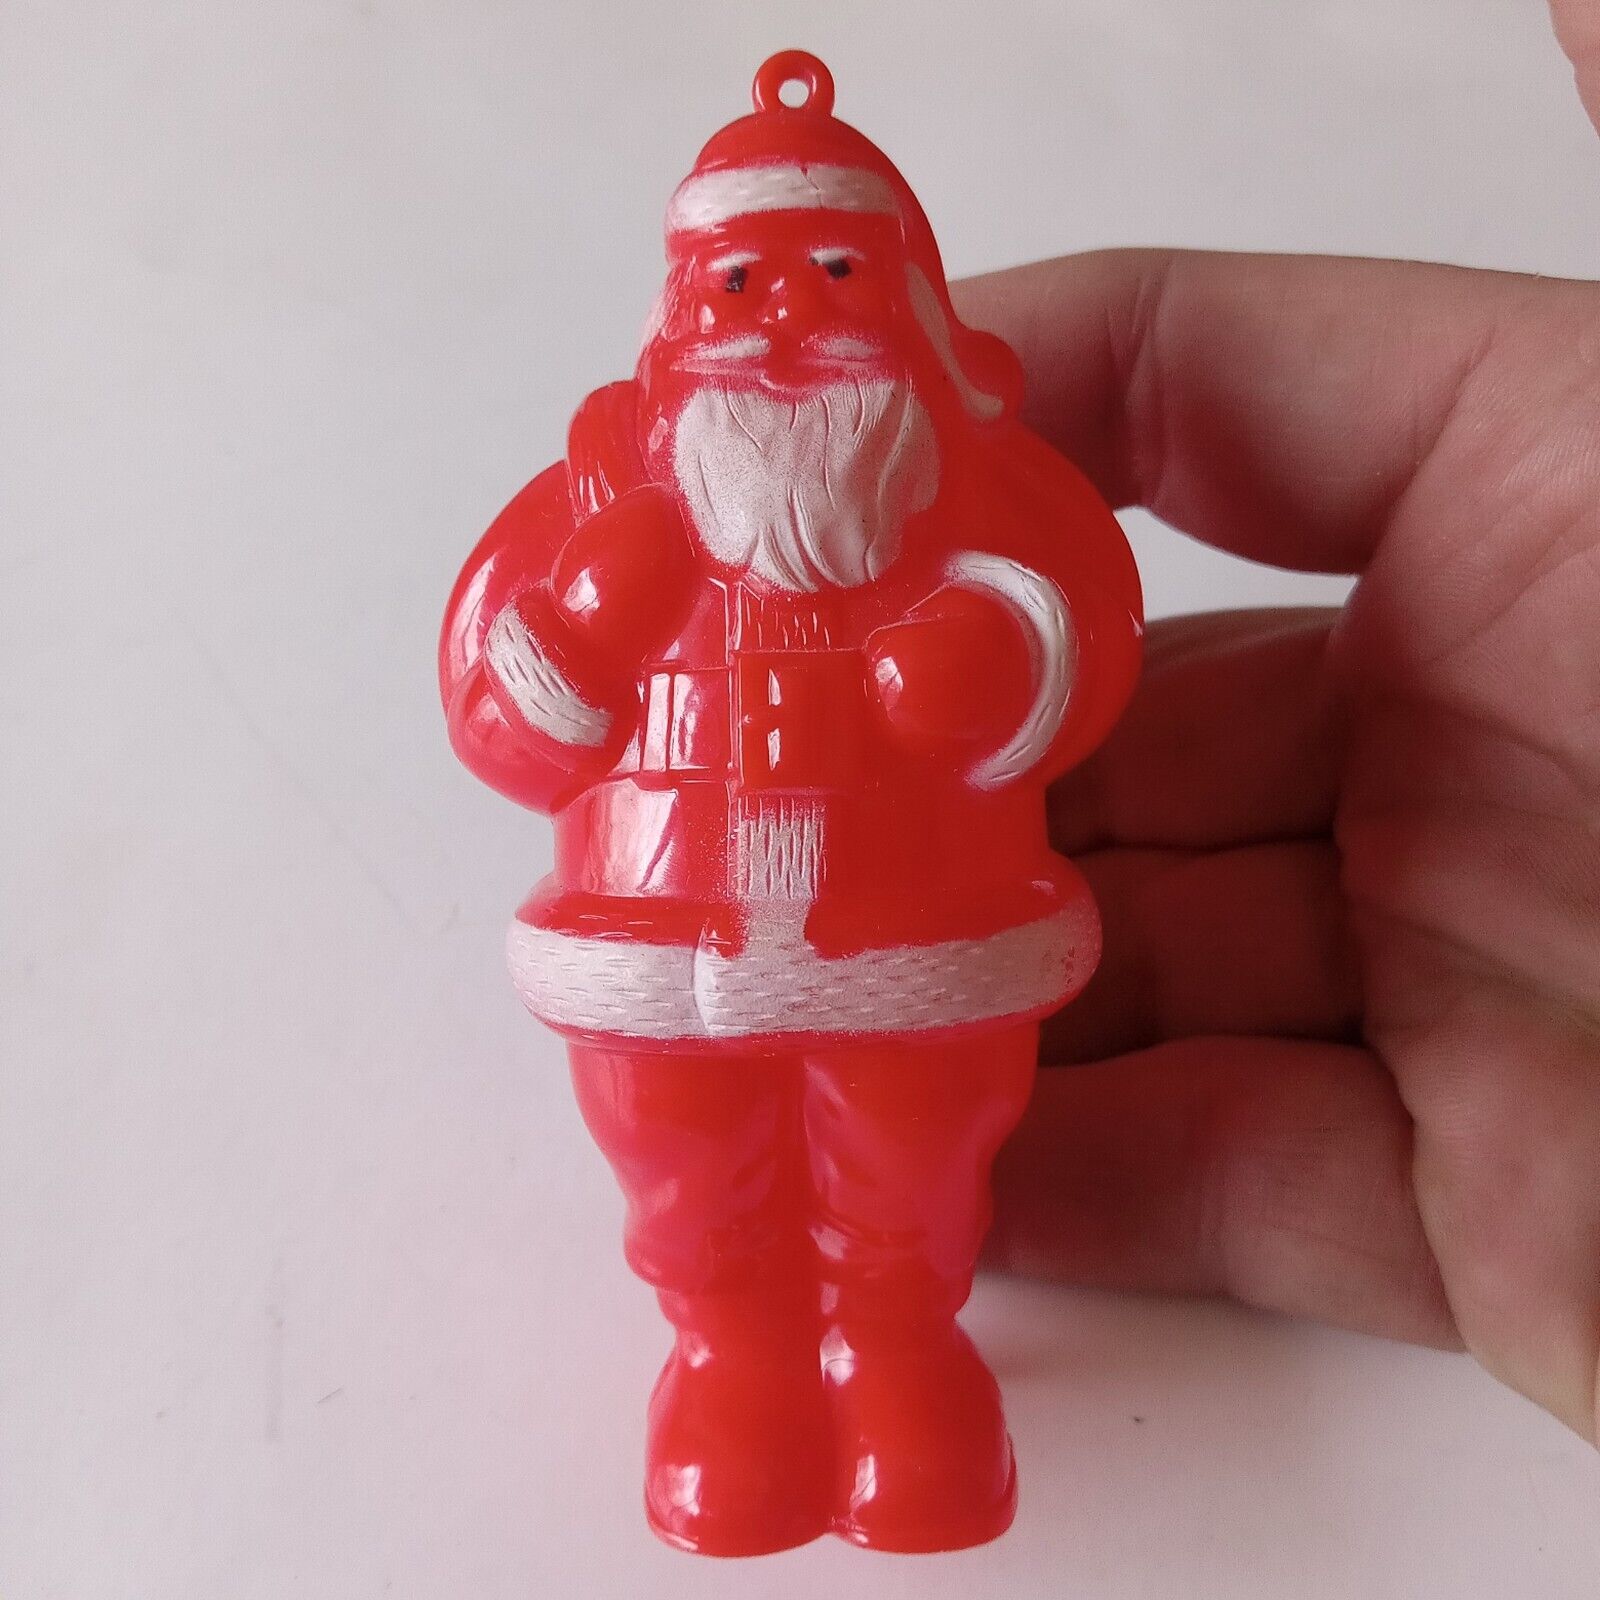 Vintage Santa Claus Christmas Ornament/Candy Container